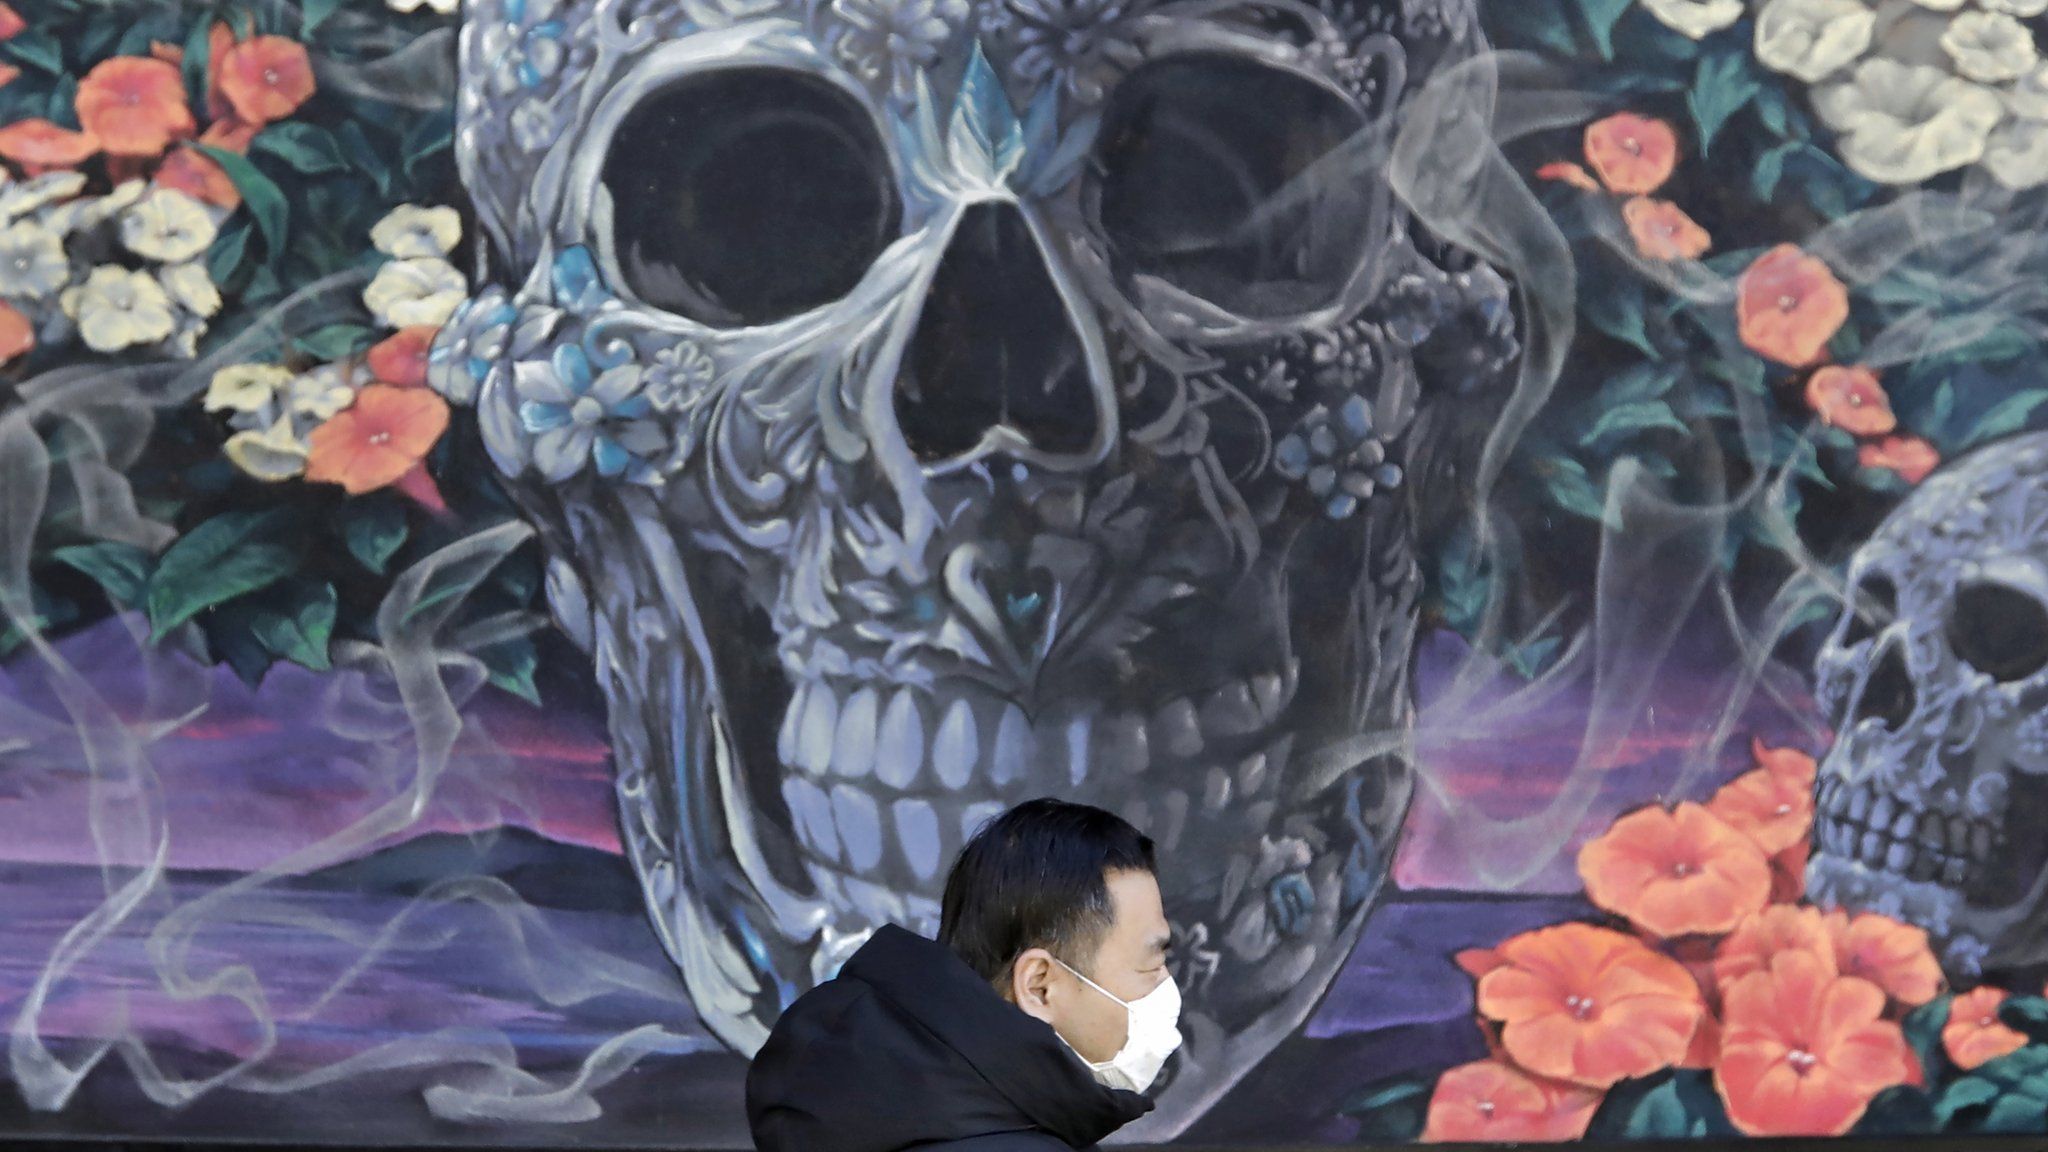 A man wears a protective face mask as he walks in front of a mural of skulls and flowers in New York